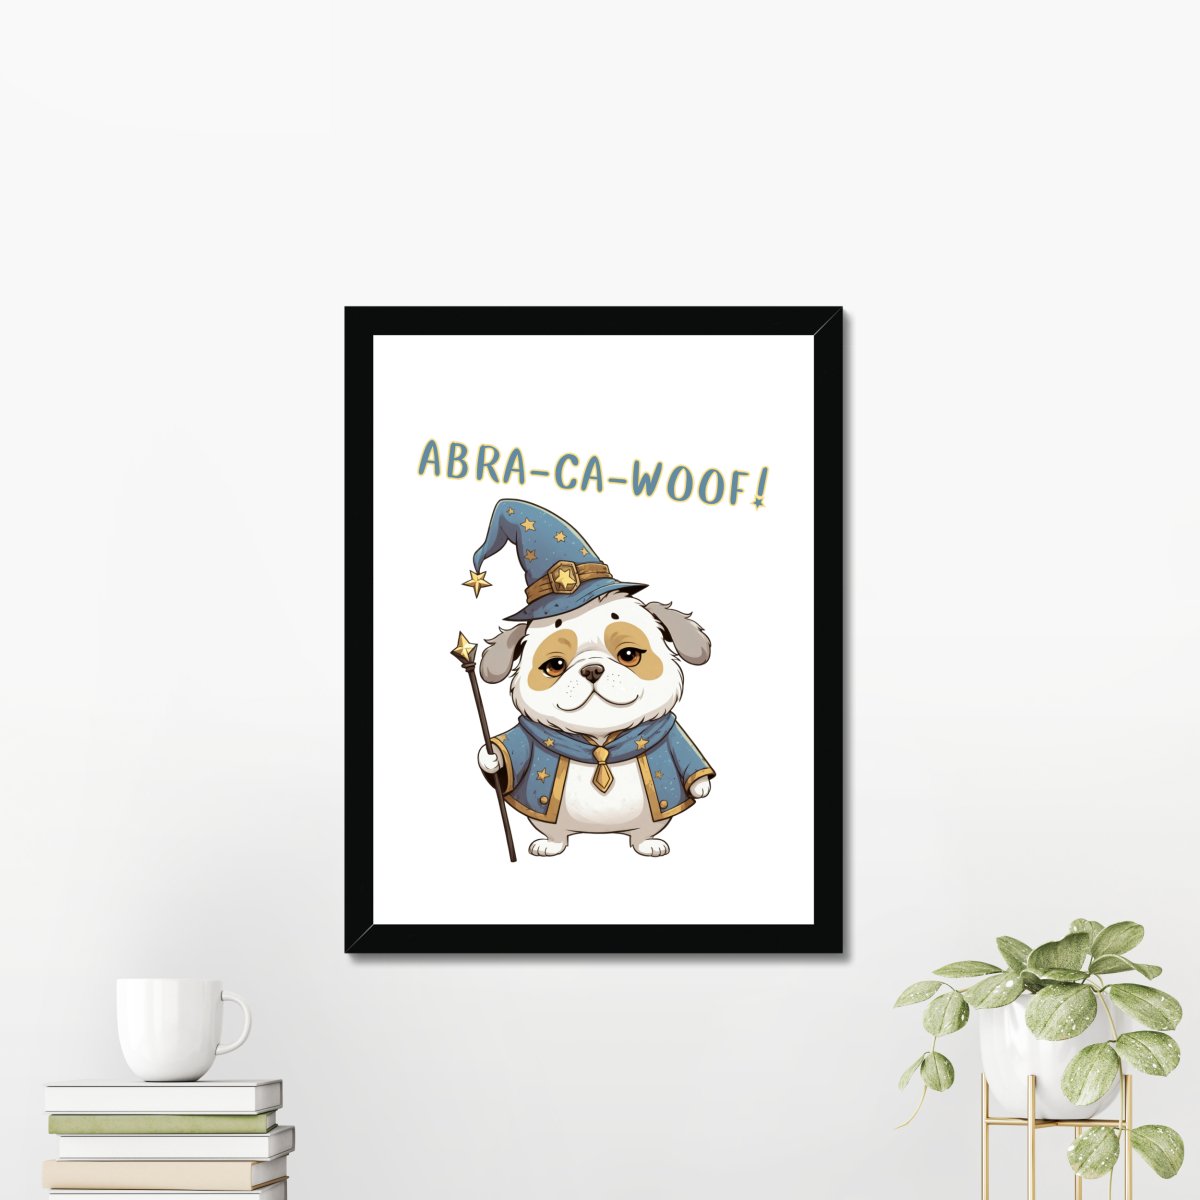 Abra-ca-woof - Art print - Poster - Ever colorful